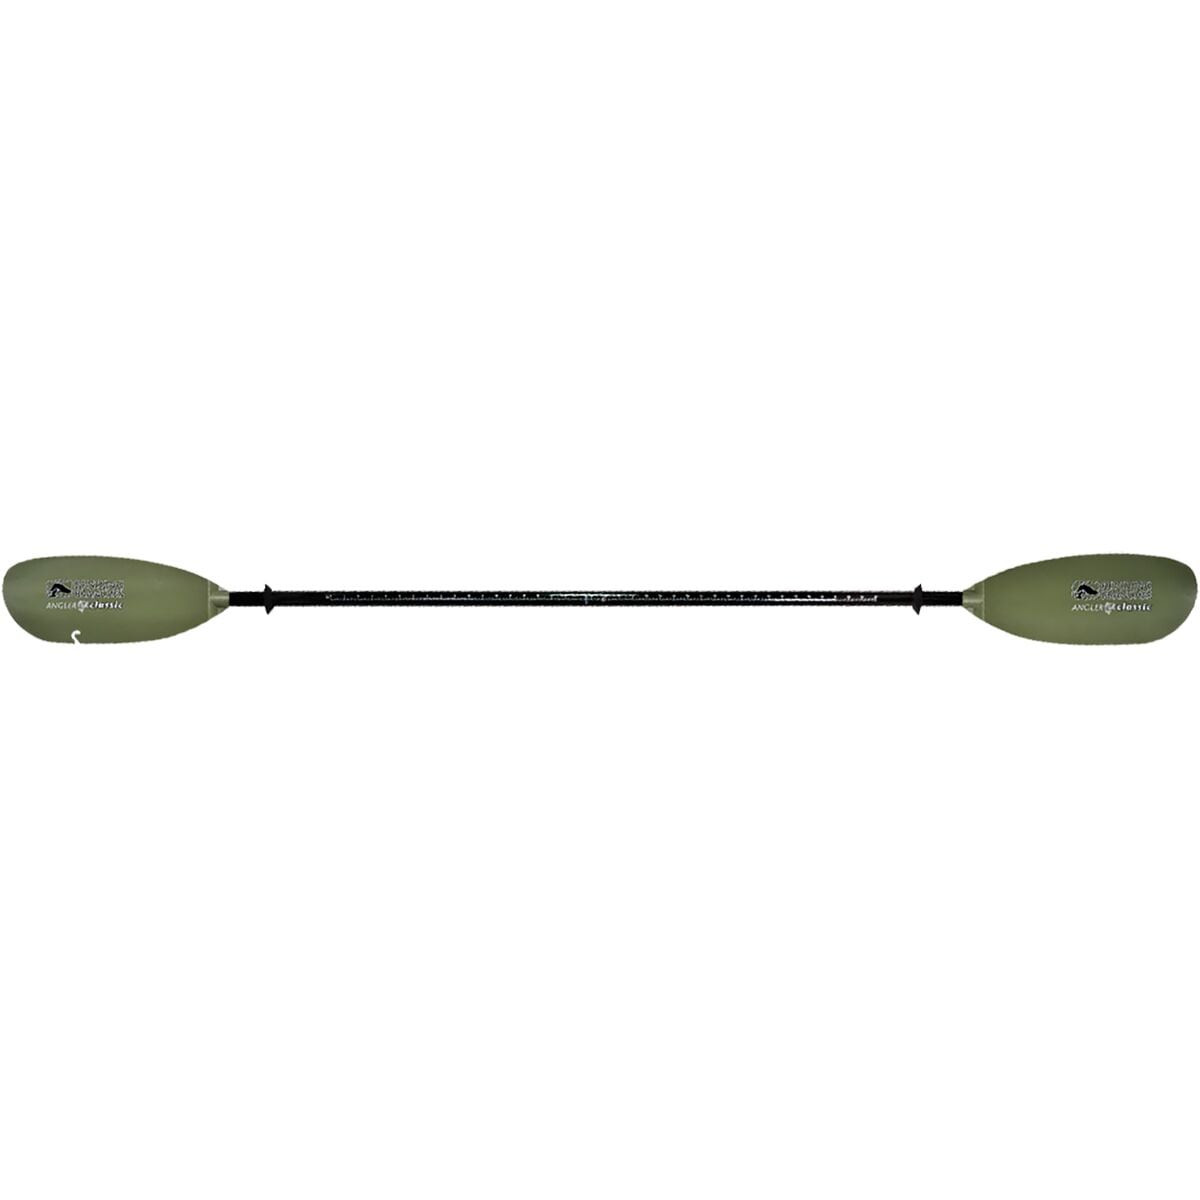 Bending Branches Classic Angler Paddle - 2-Piece Snap-Button